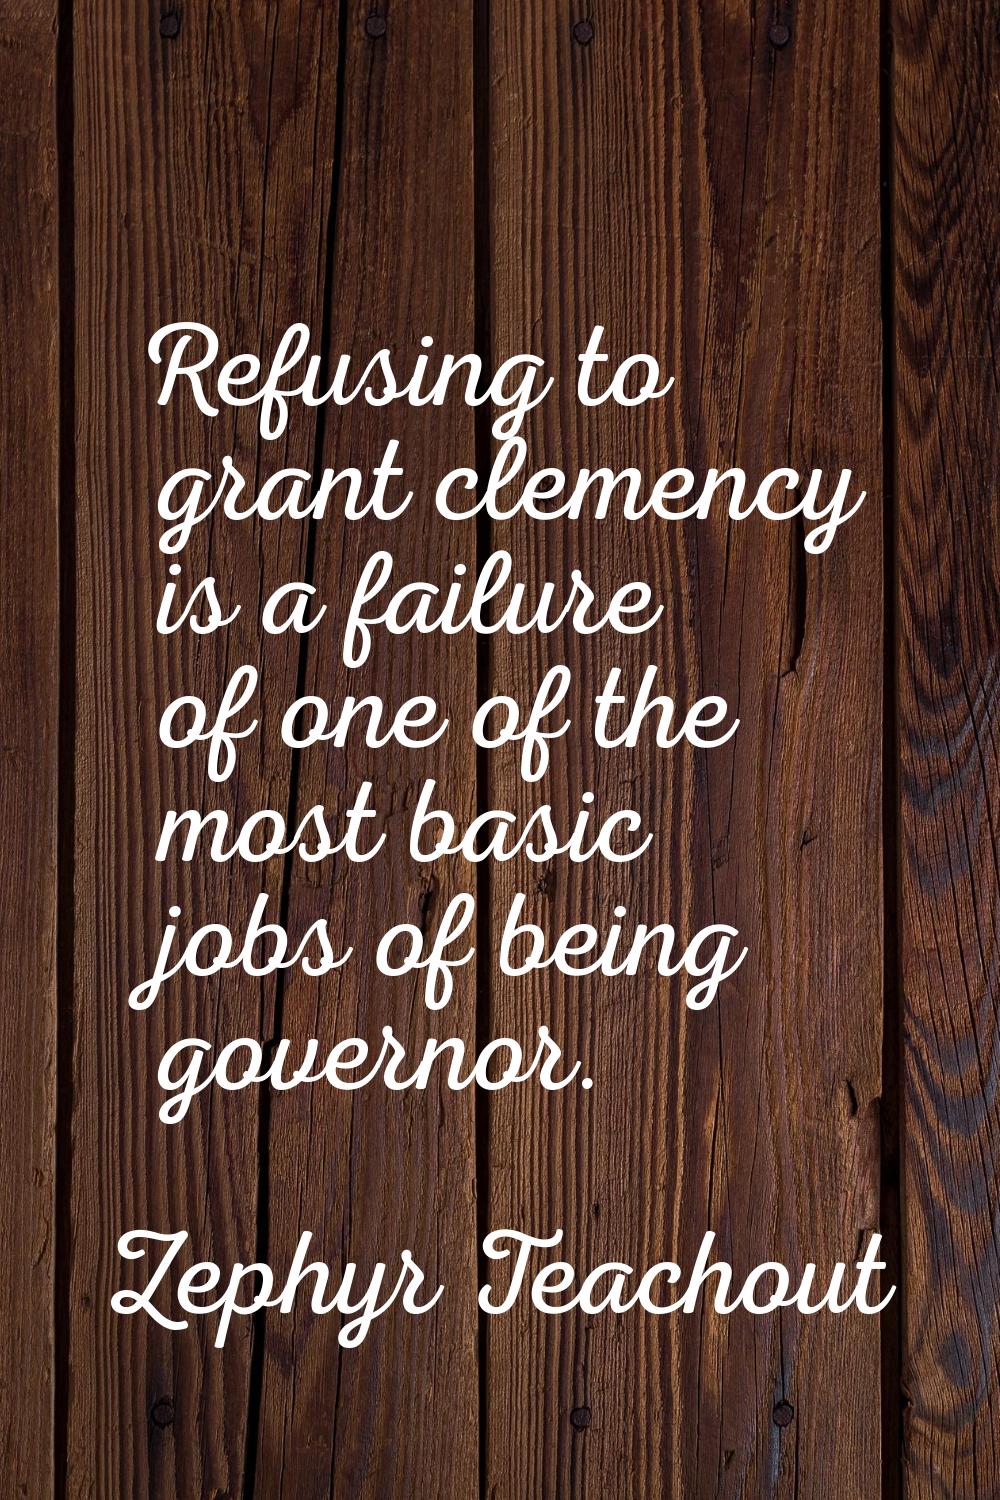 Refusing to grant clemency is a failure of one of the most basic jobs of being governor.